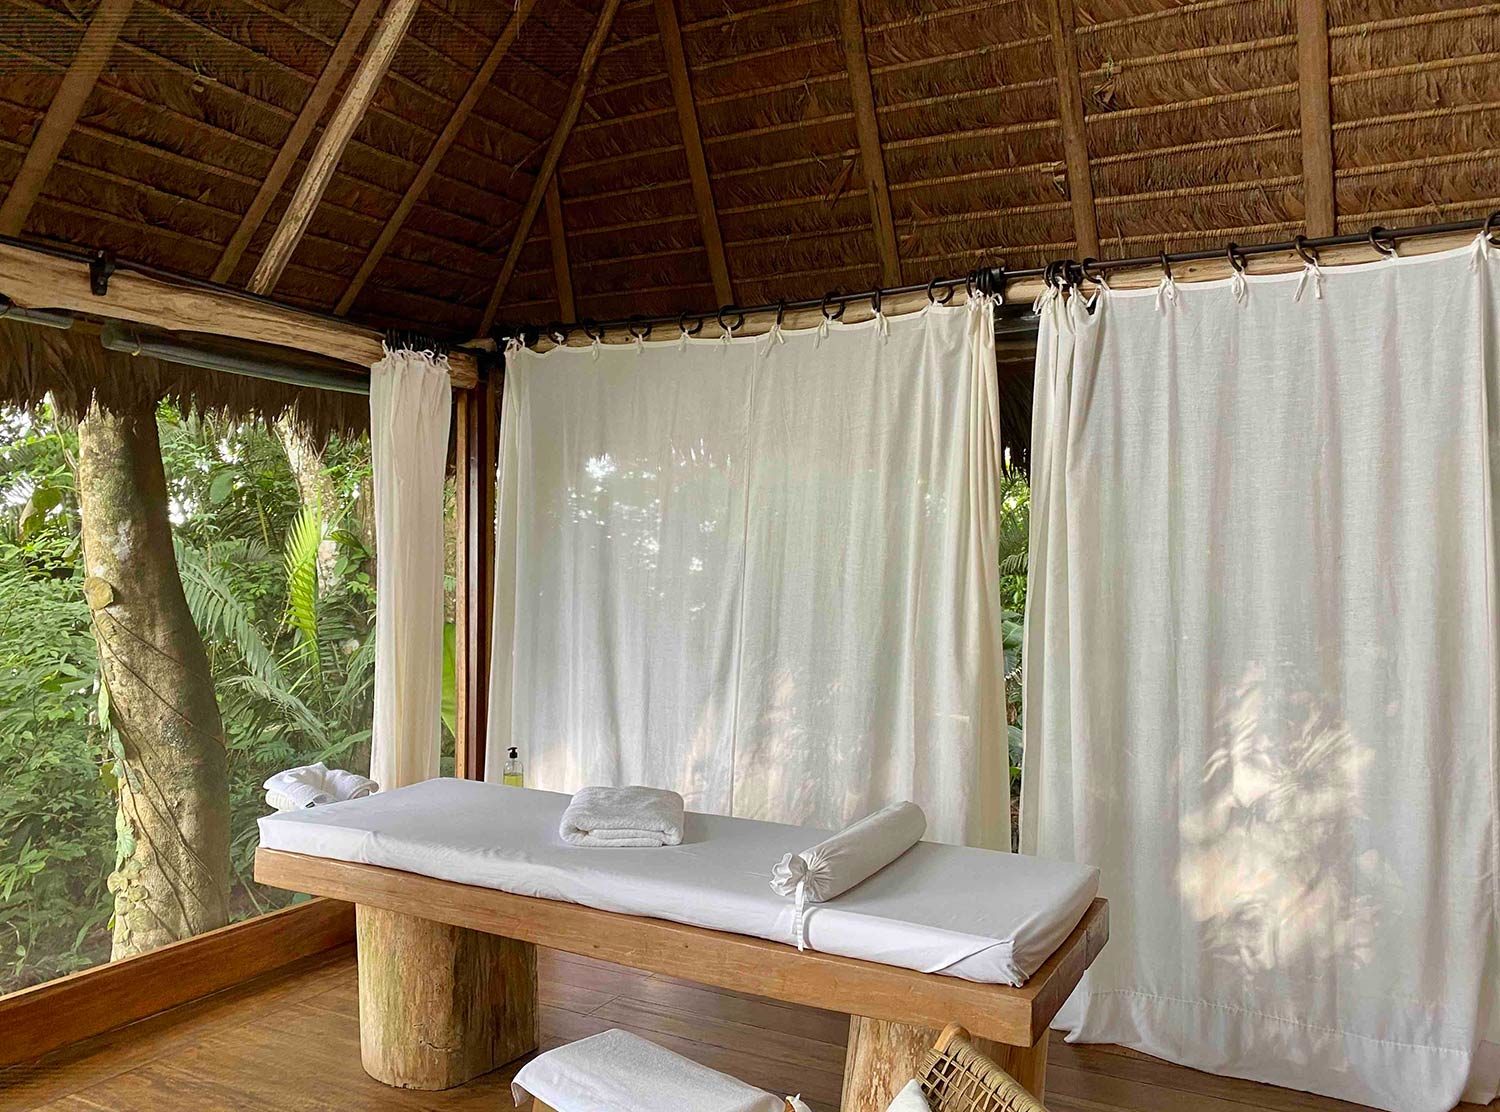 Inkaterra Reserva Amazonica Wellness with a view